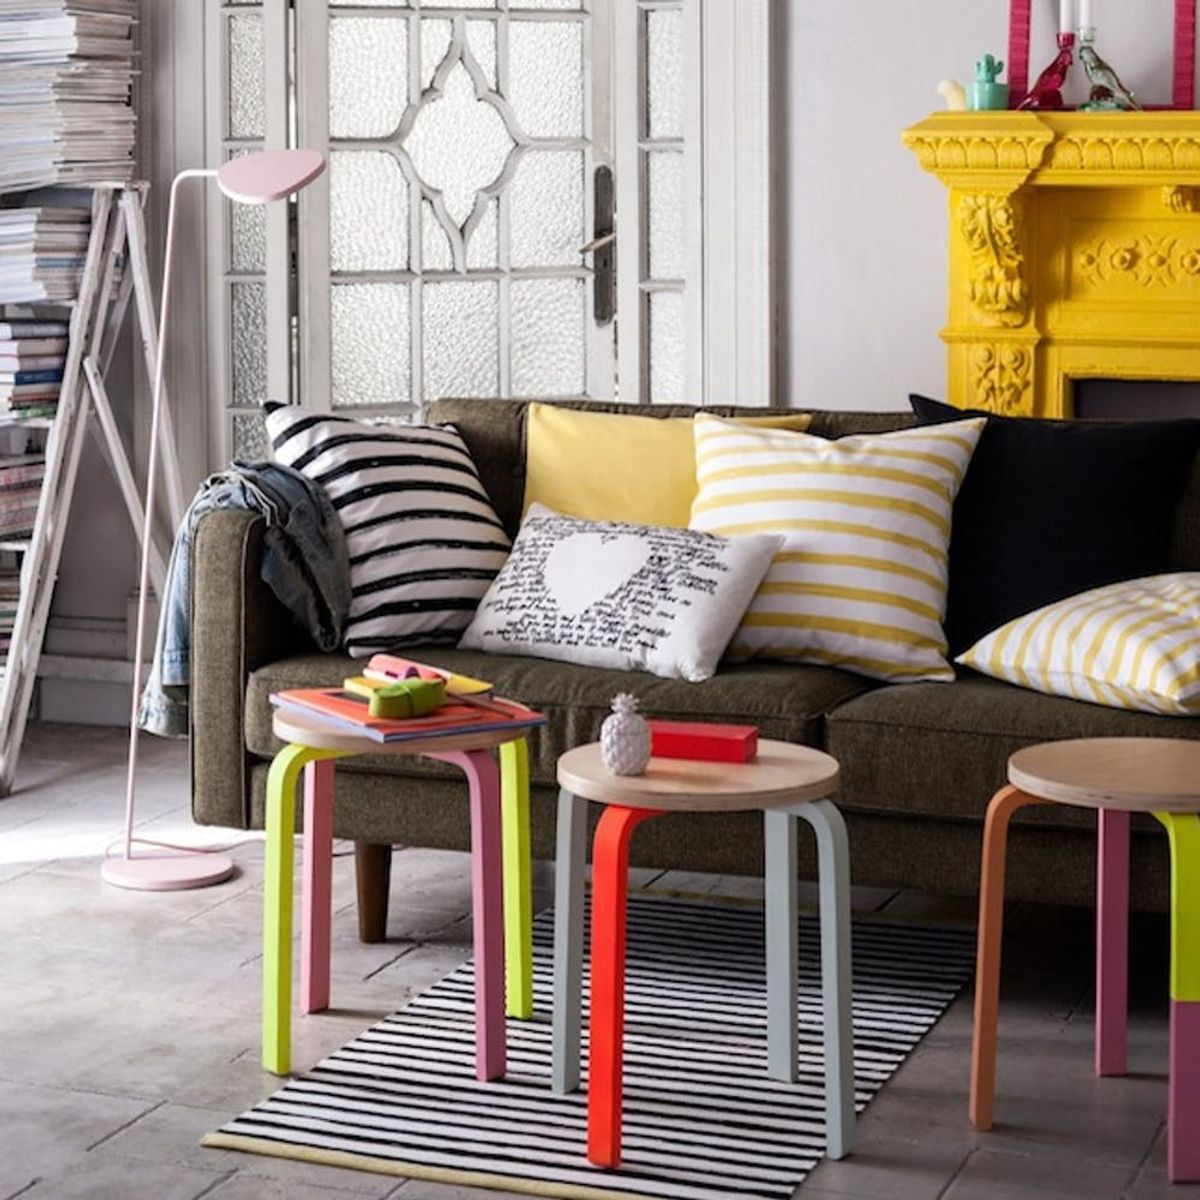 20 Top Picks from H&M’s Spring 2015 Home Collection